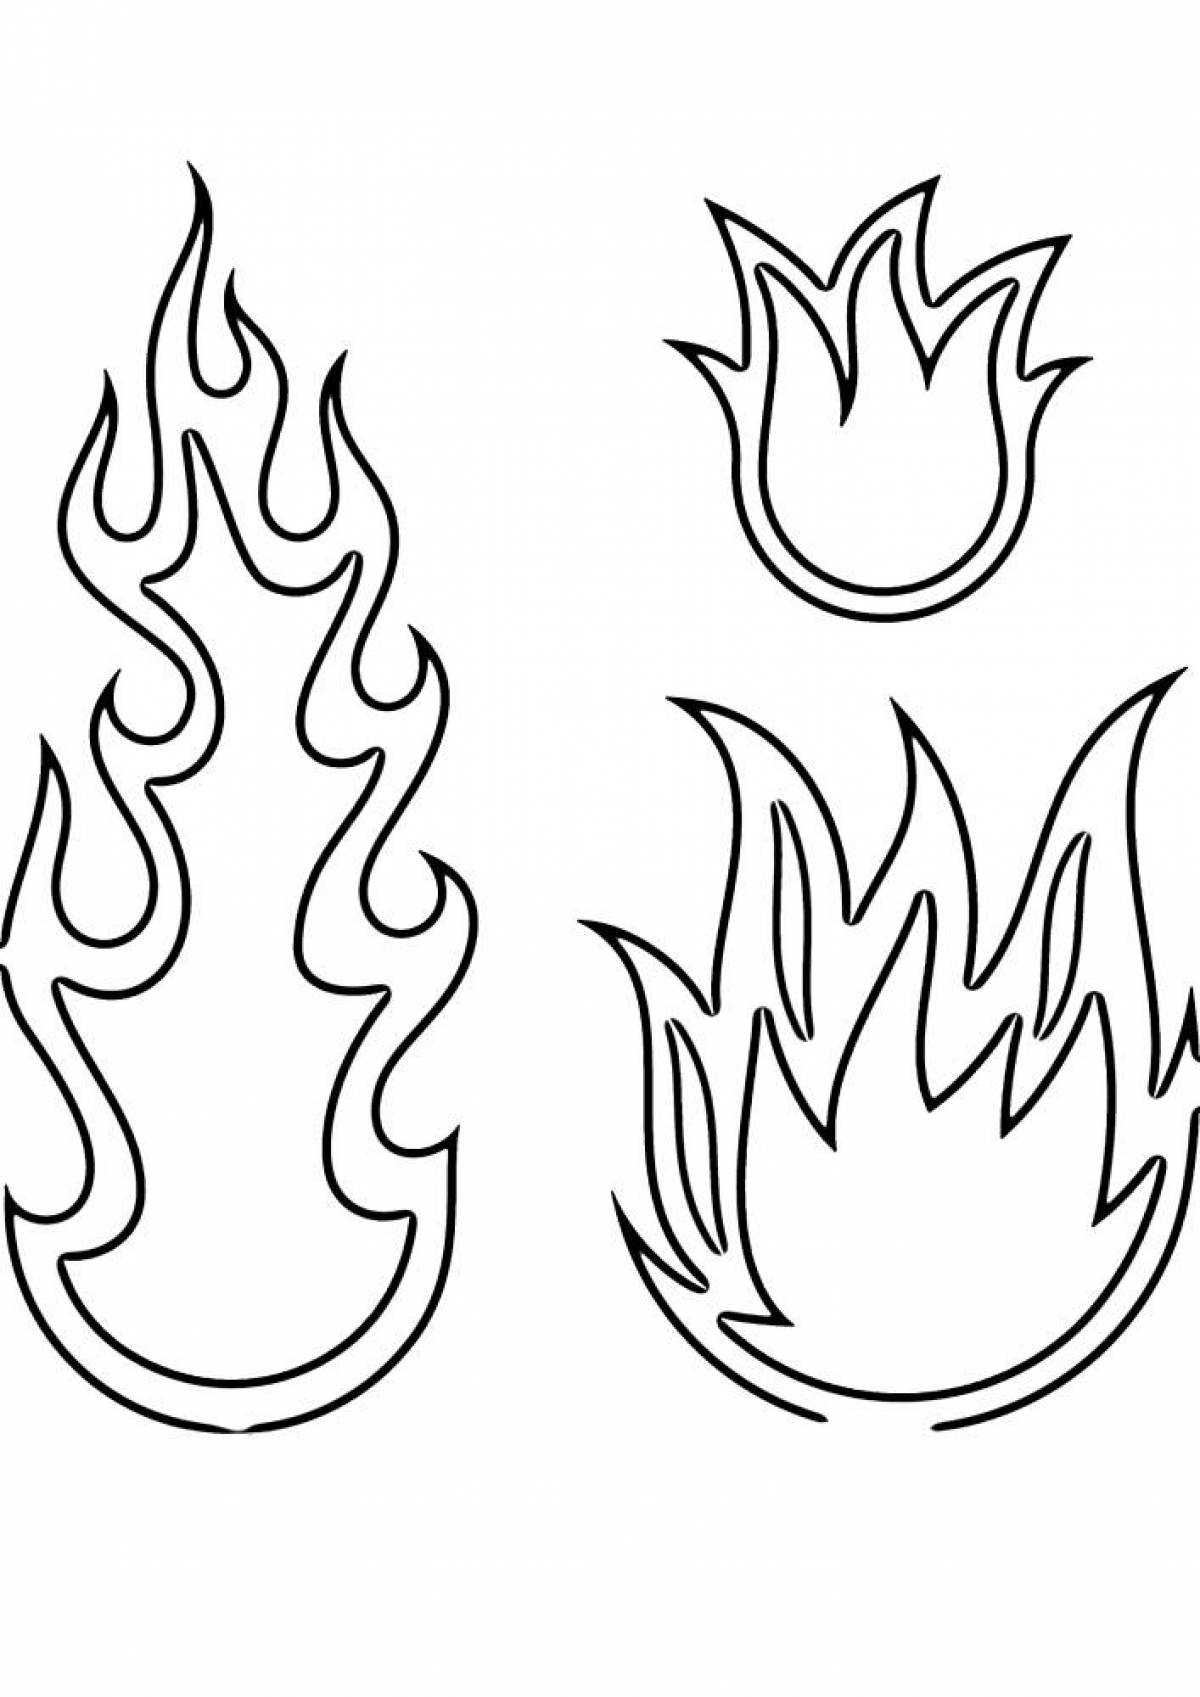 Playful fire coloring page for kids